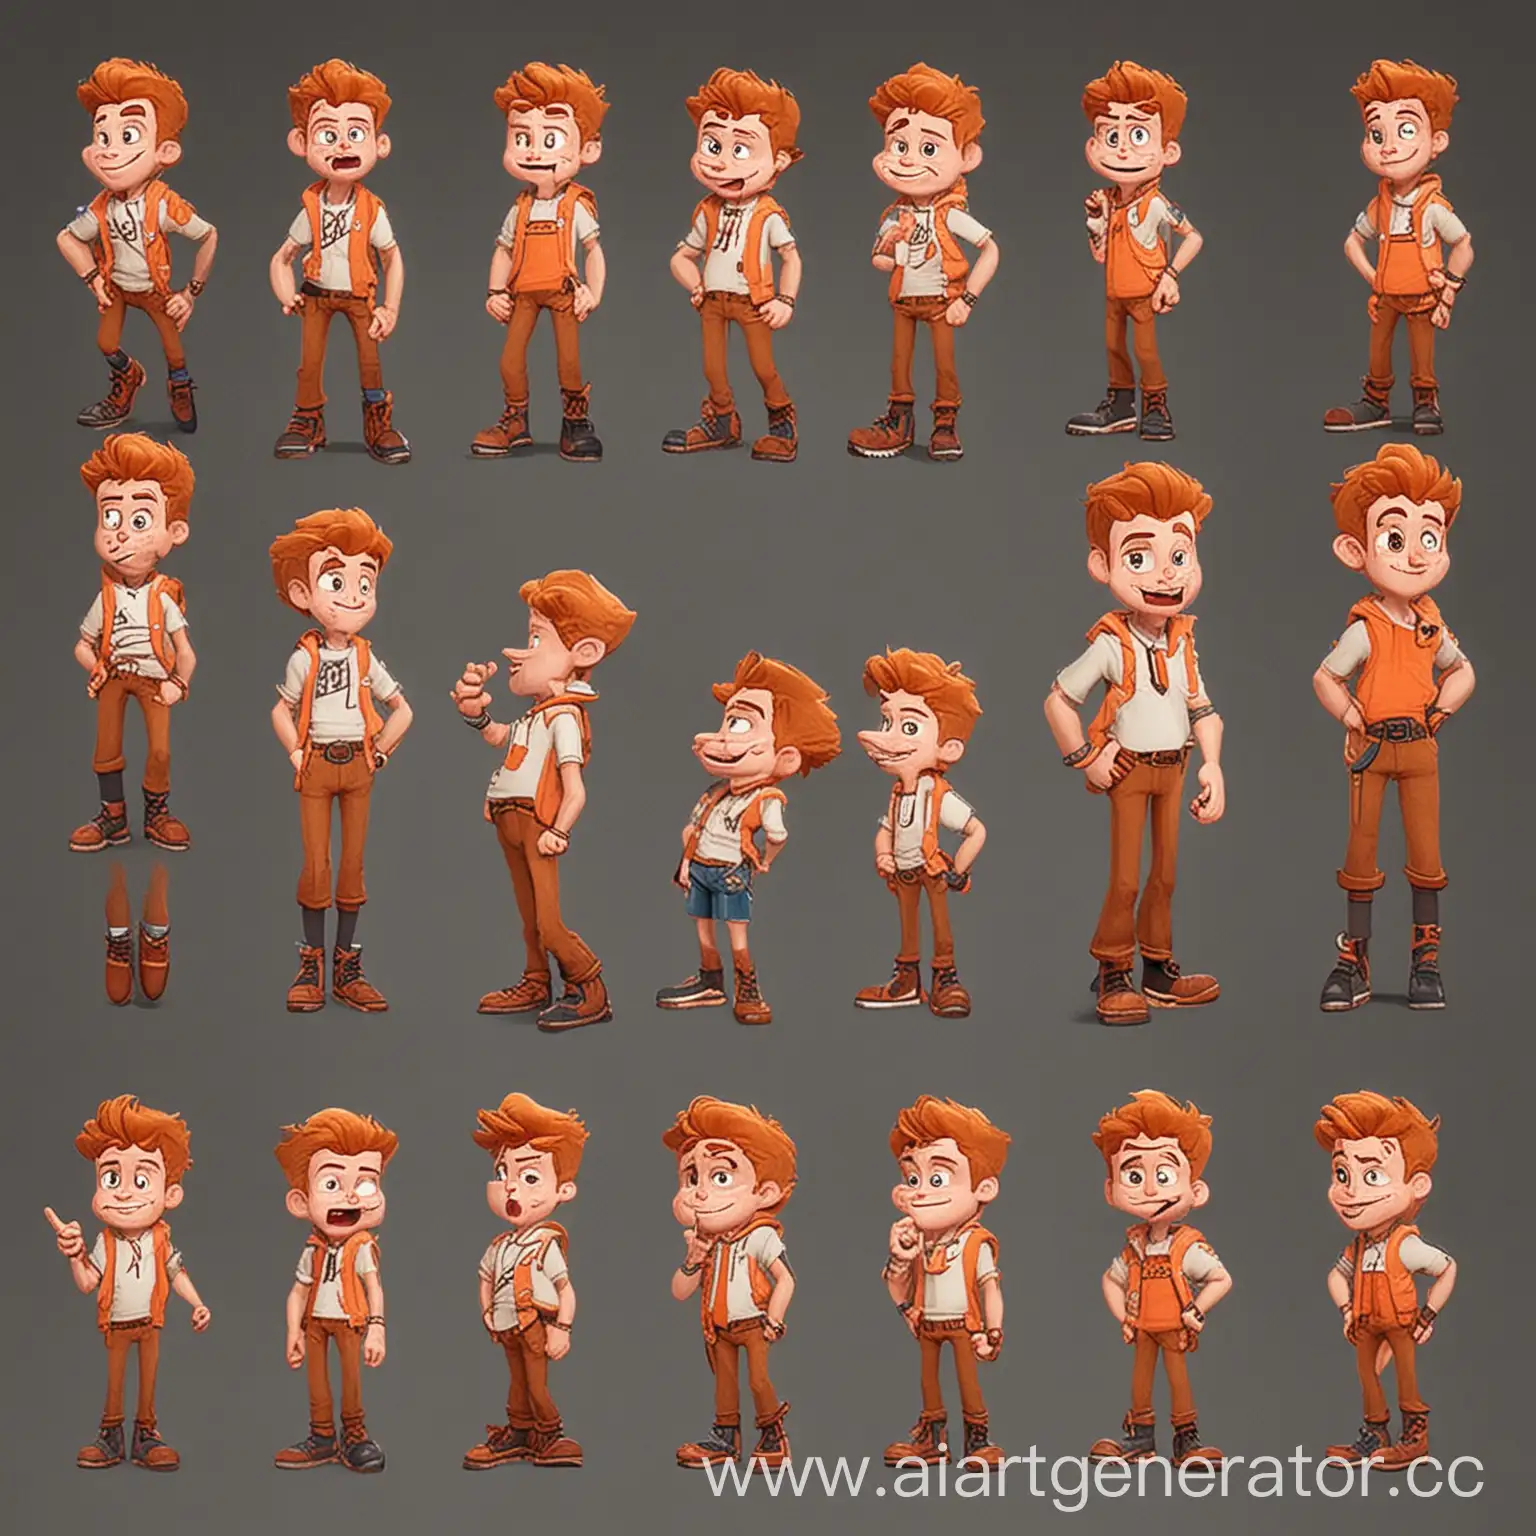 Animated-Character-Nick-in-Playful-Poses